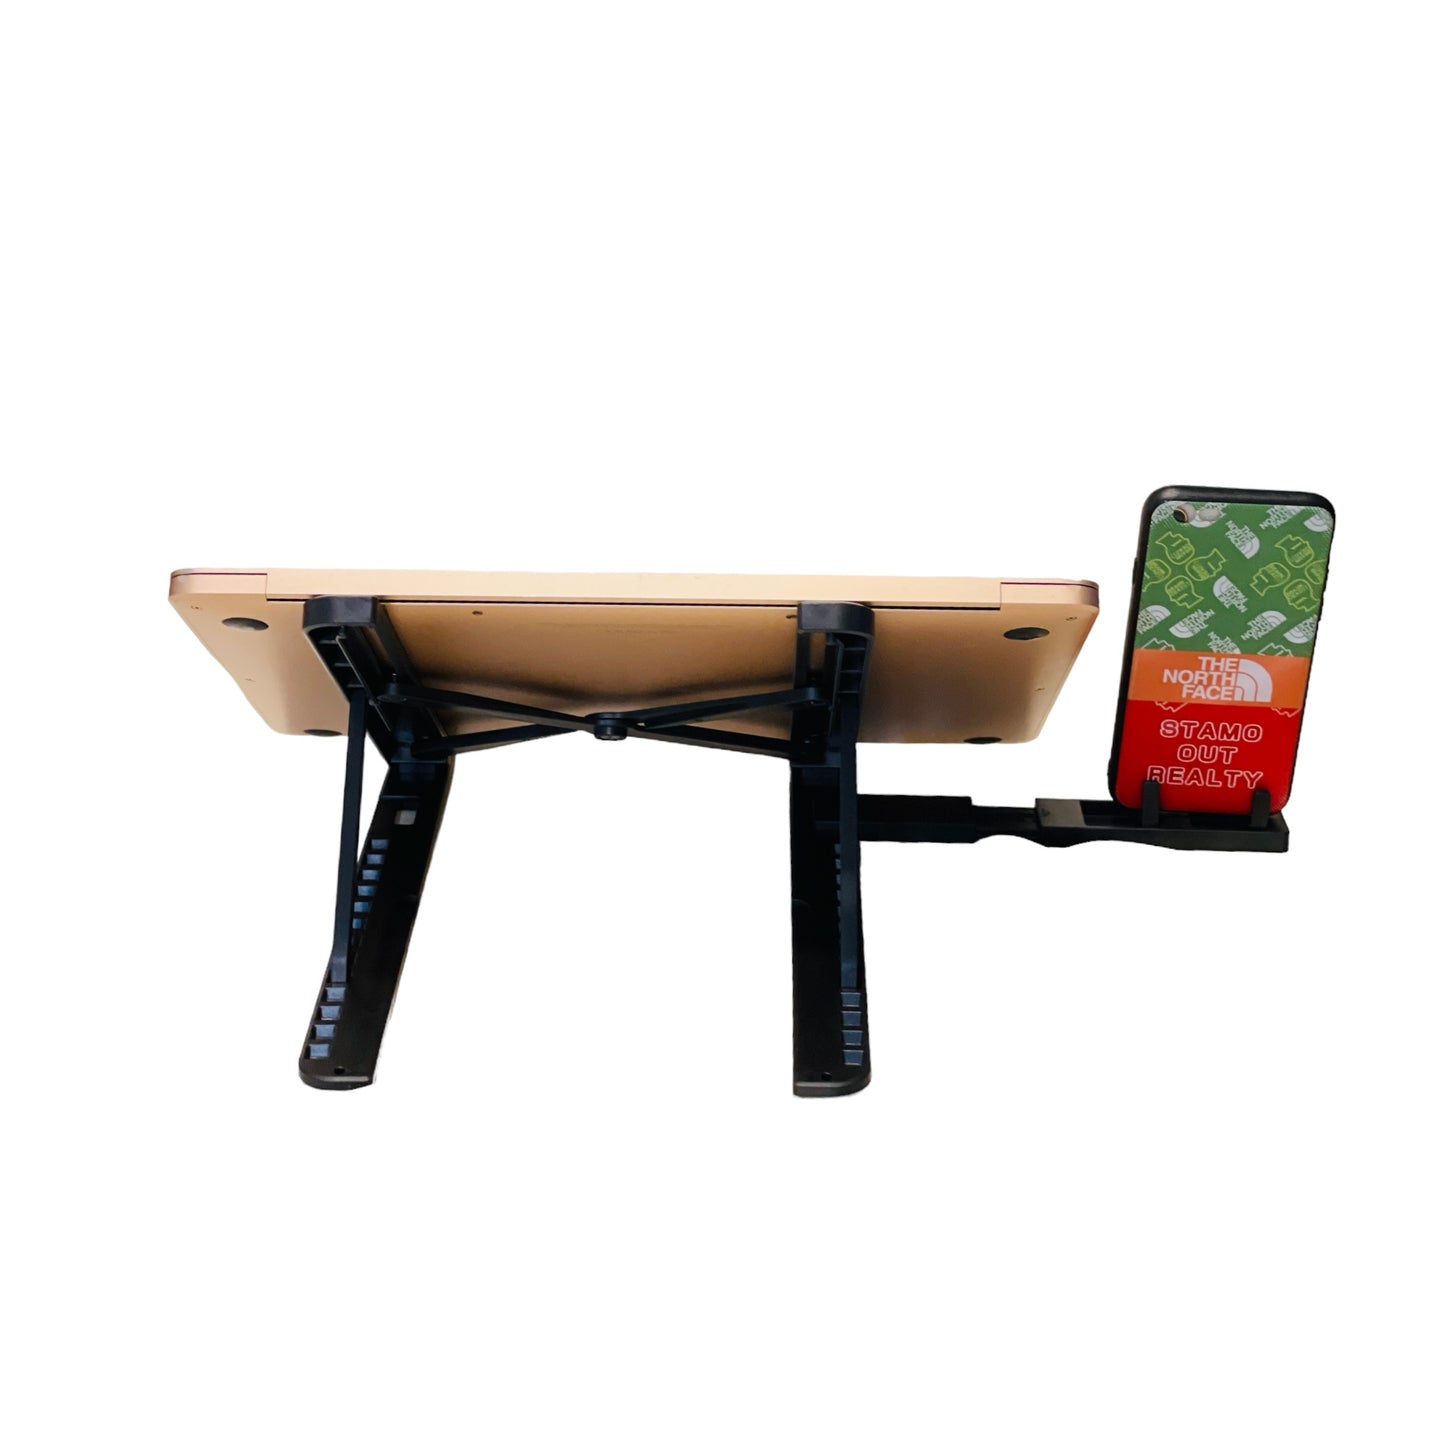 2-in-1 Laptop stand with phone holder